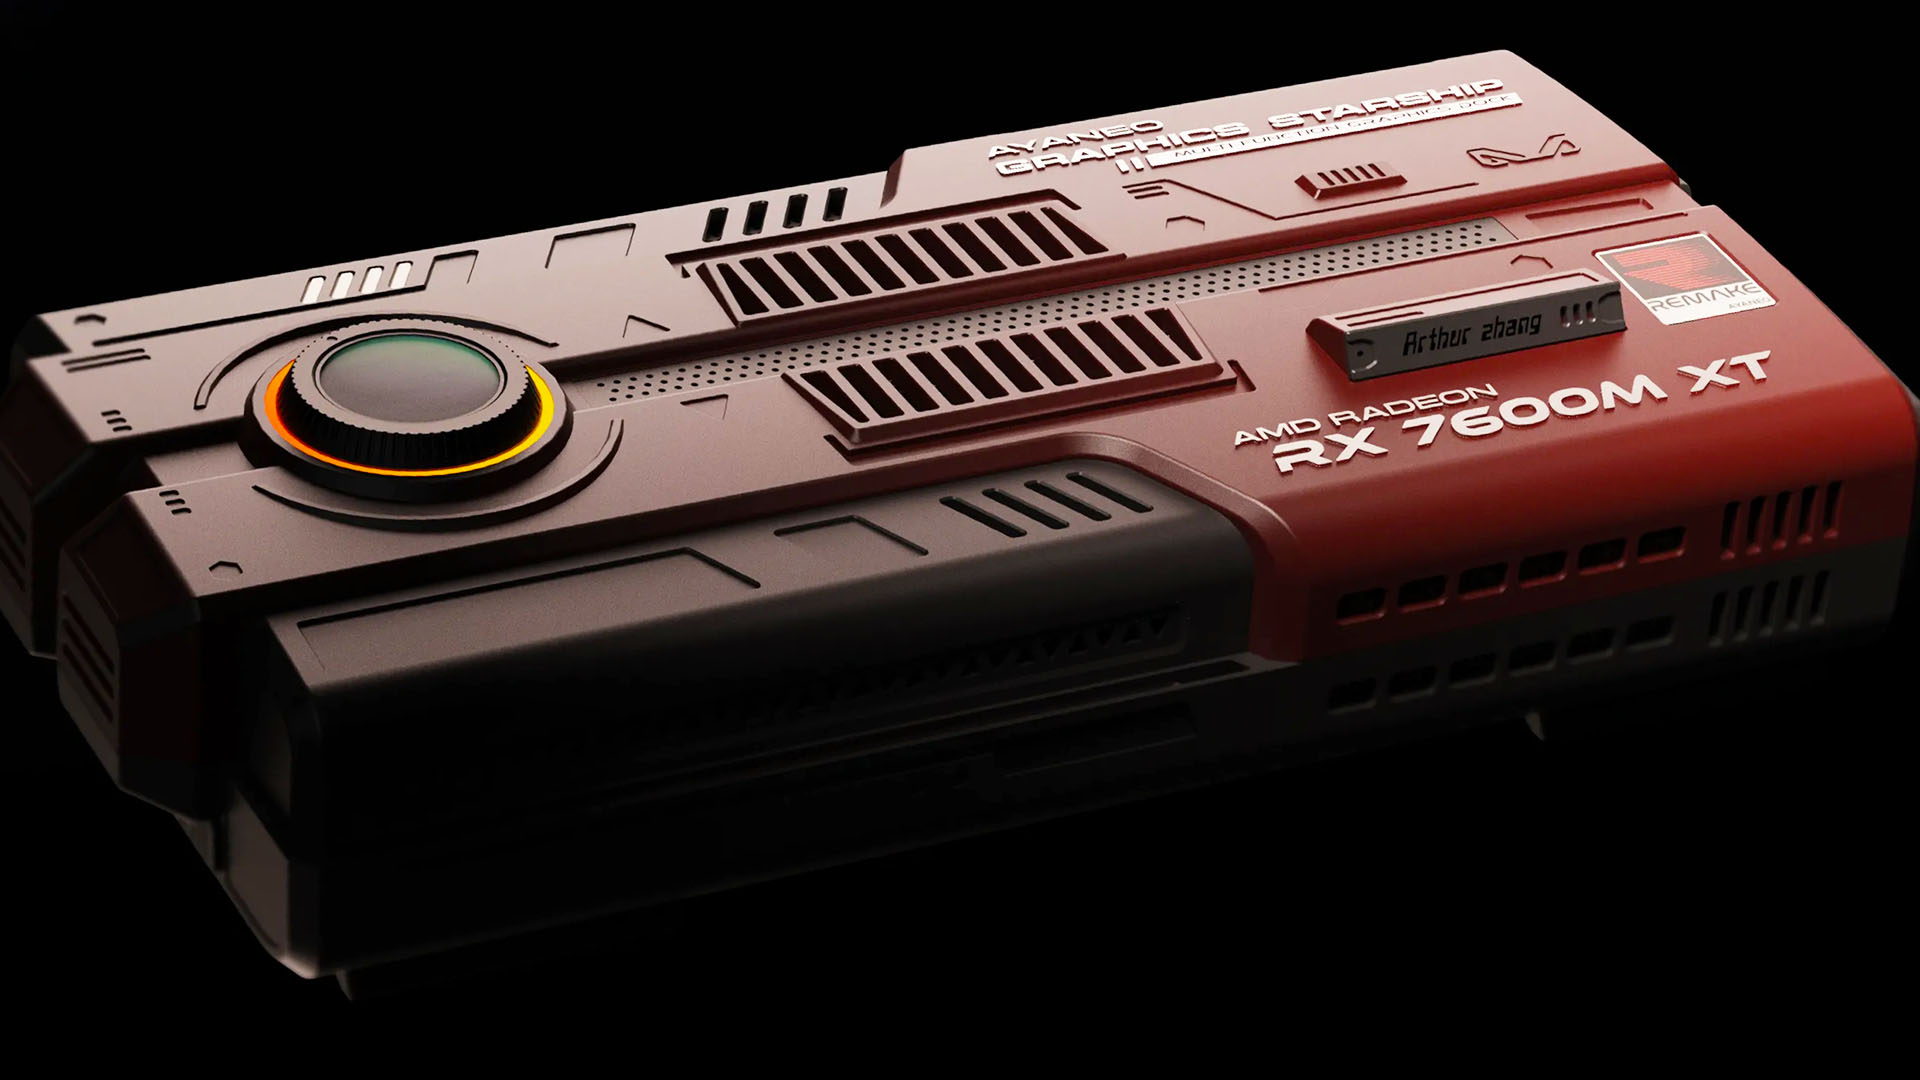 Ayaneo's new retro spaceship toy upgrades your laptop to an AMD GPU